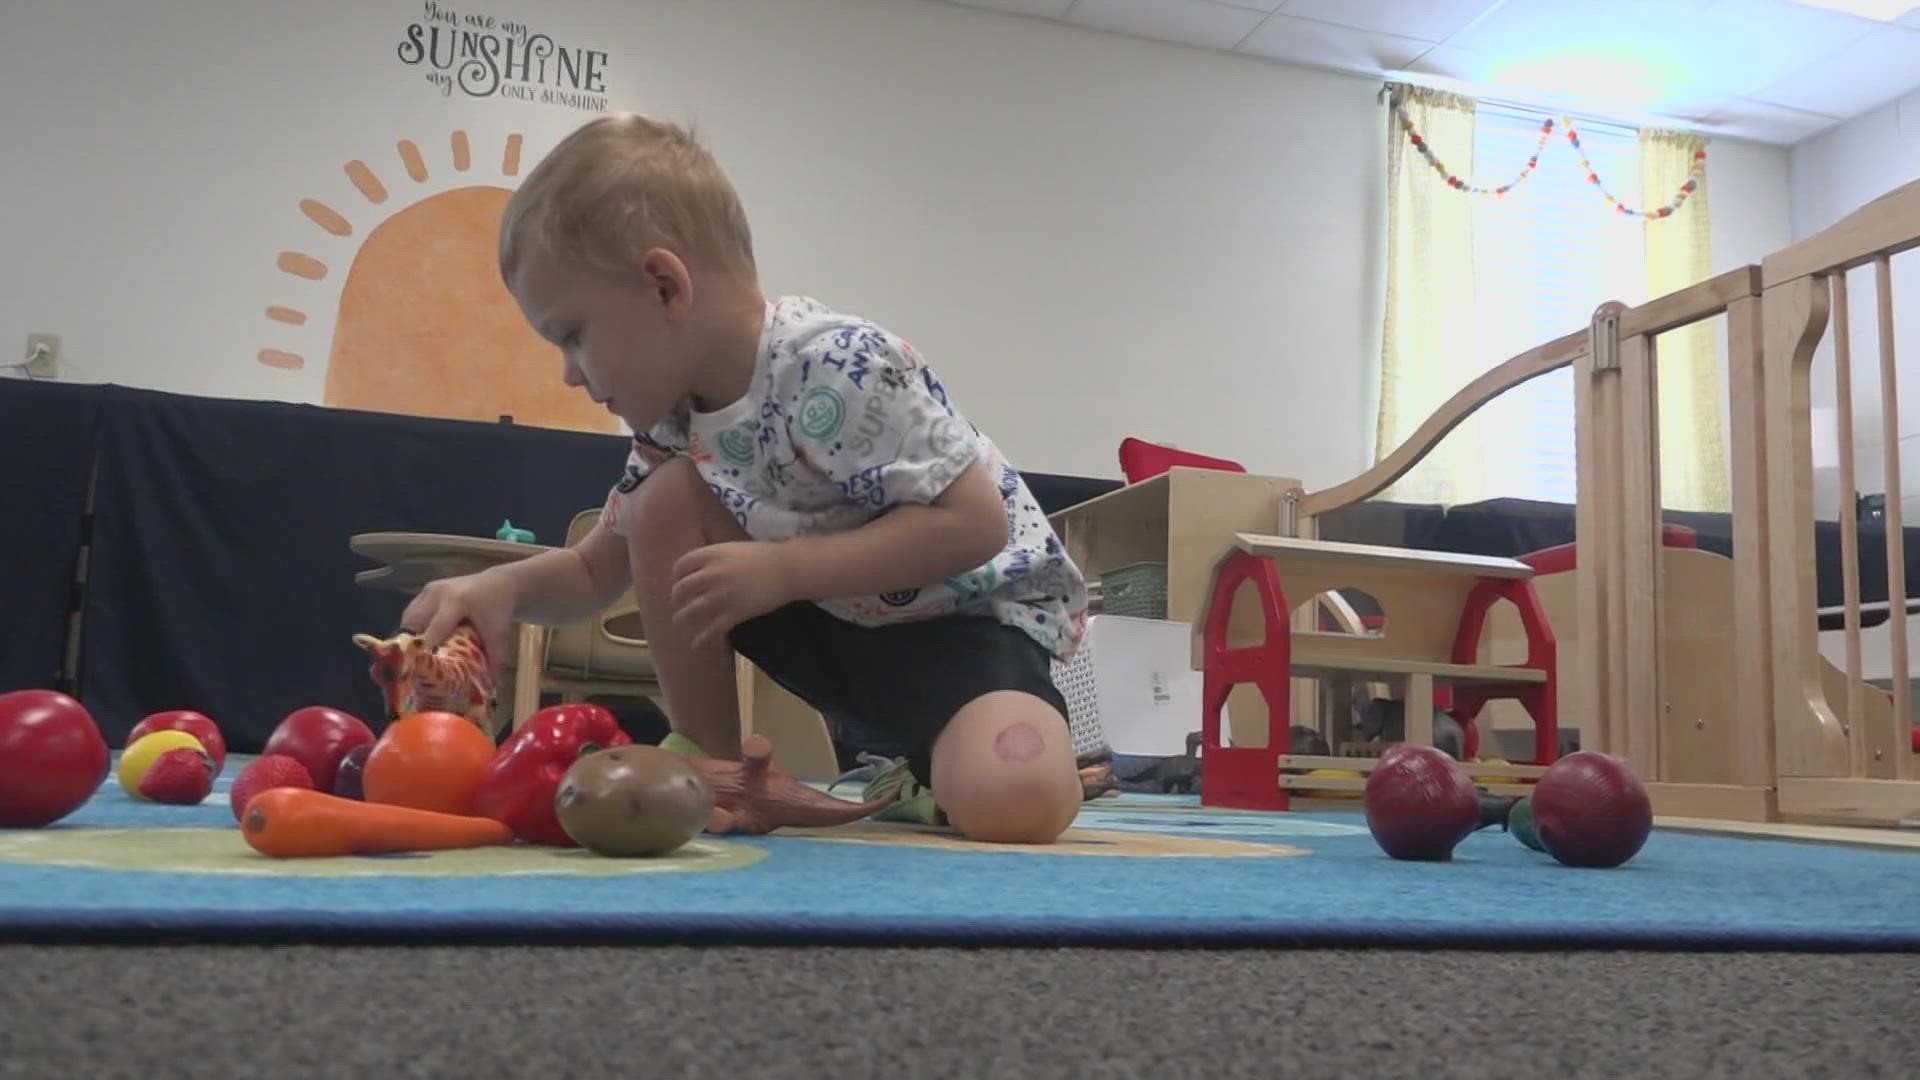 Childcare is a problem in the area. So Dunklin R-5 administrators say they're trying something new: a daycare.